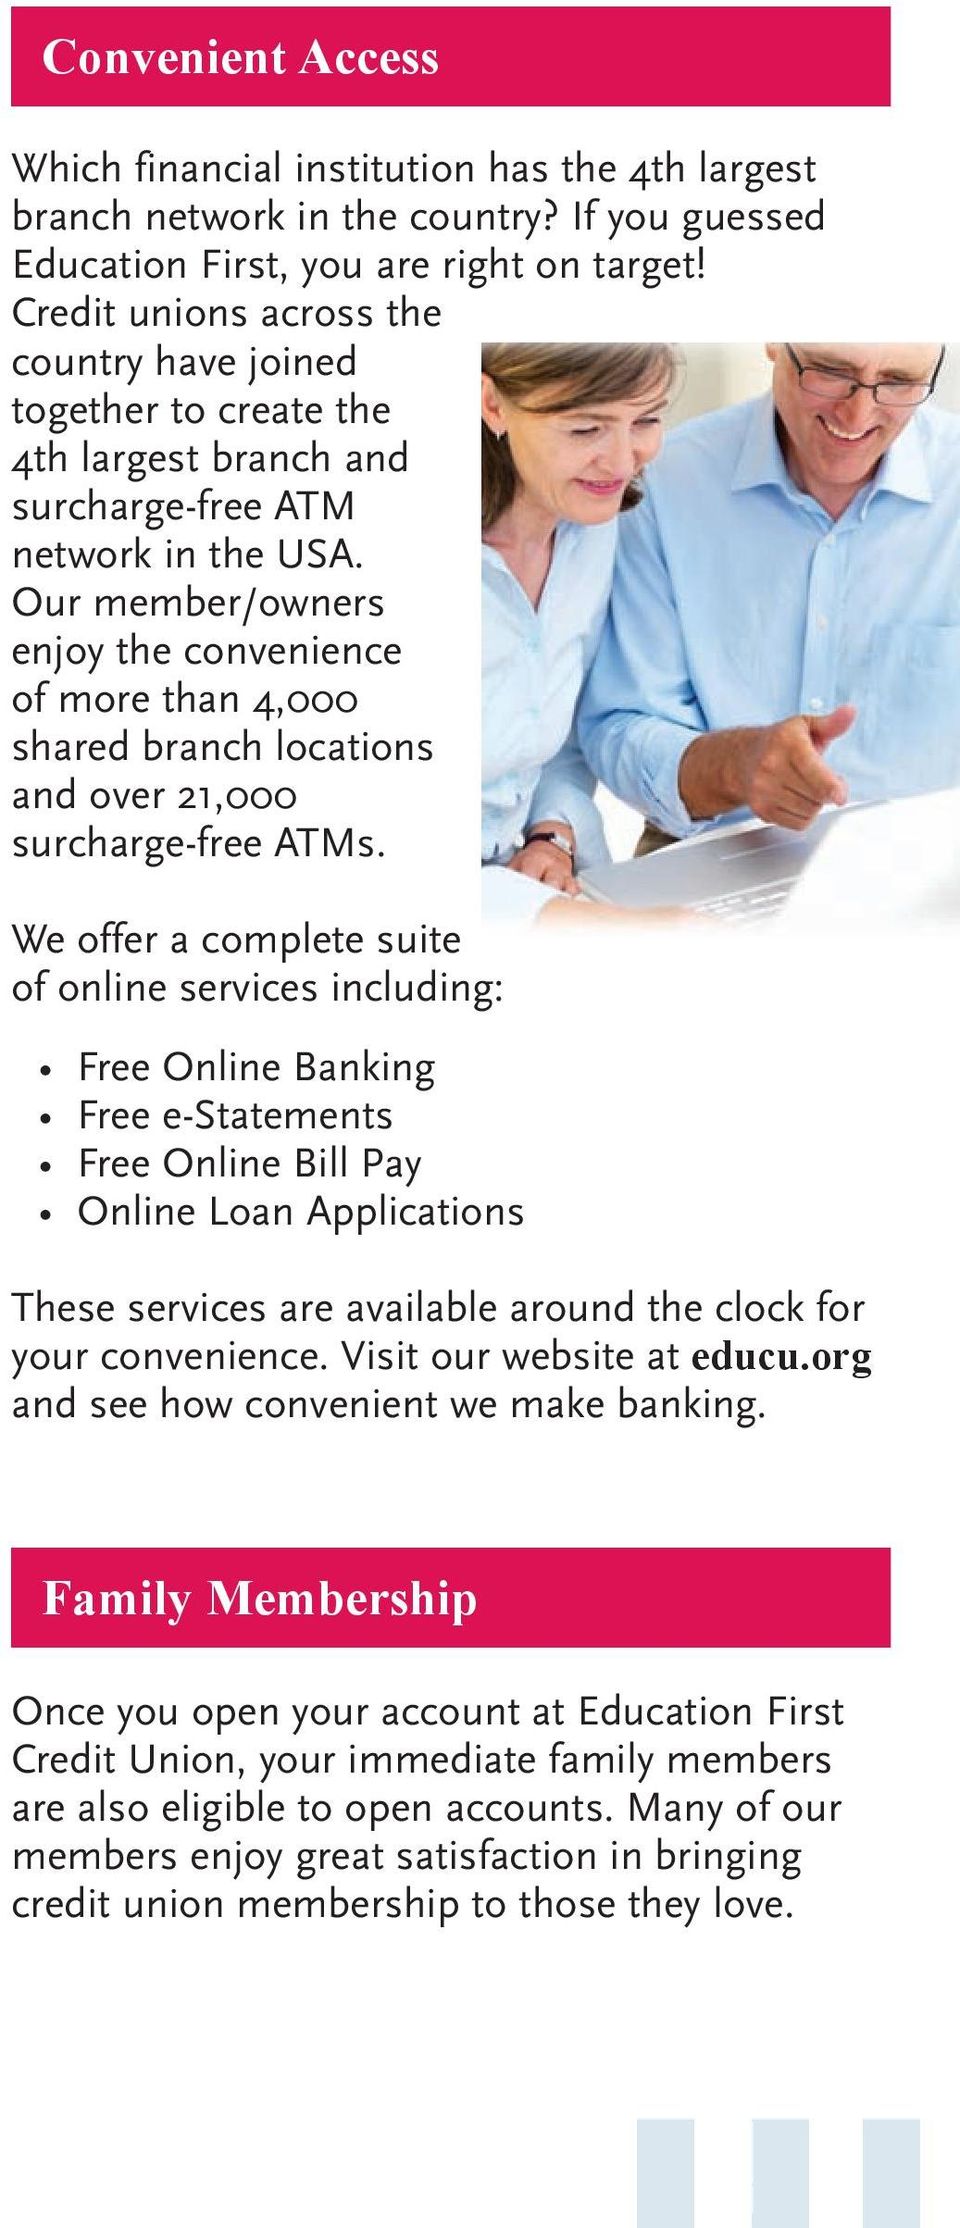 Our member/owners enjoy the convenience of more than 4,000 shared branch locations and over 21,000 surcharge-free ATMs.